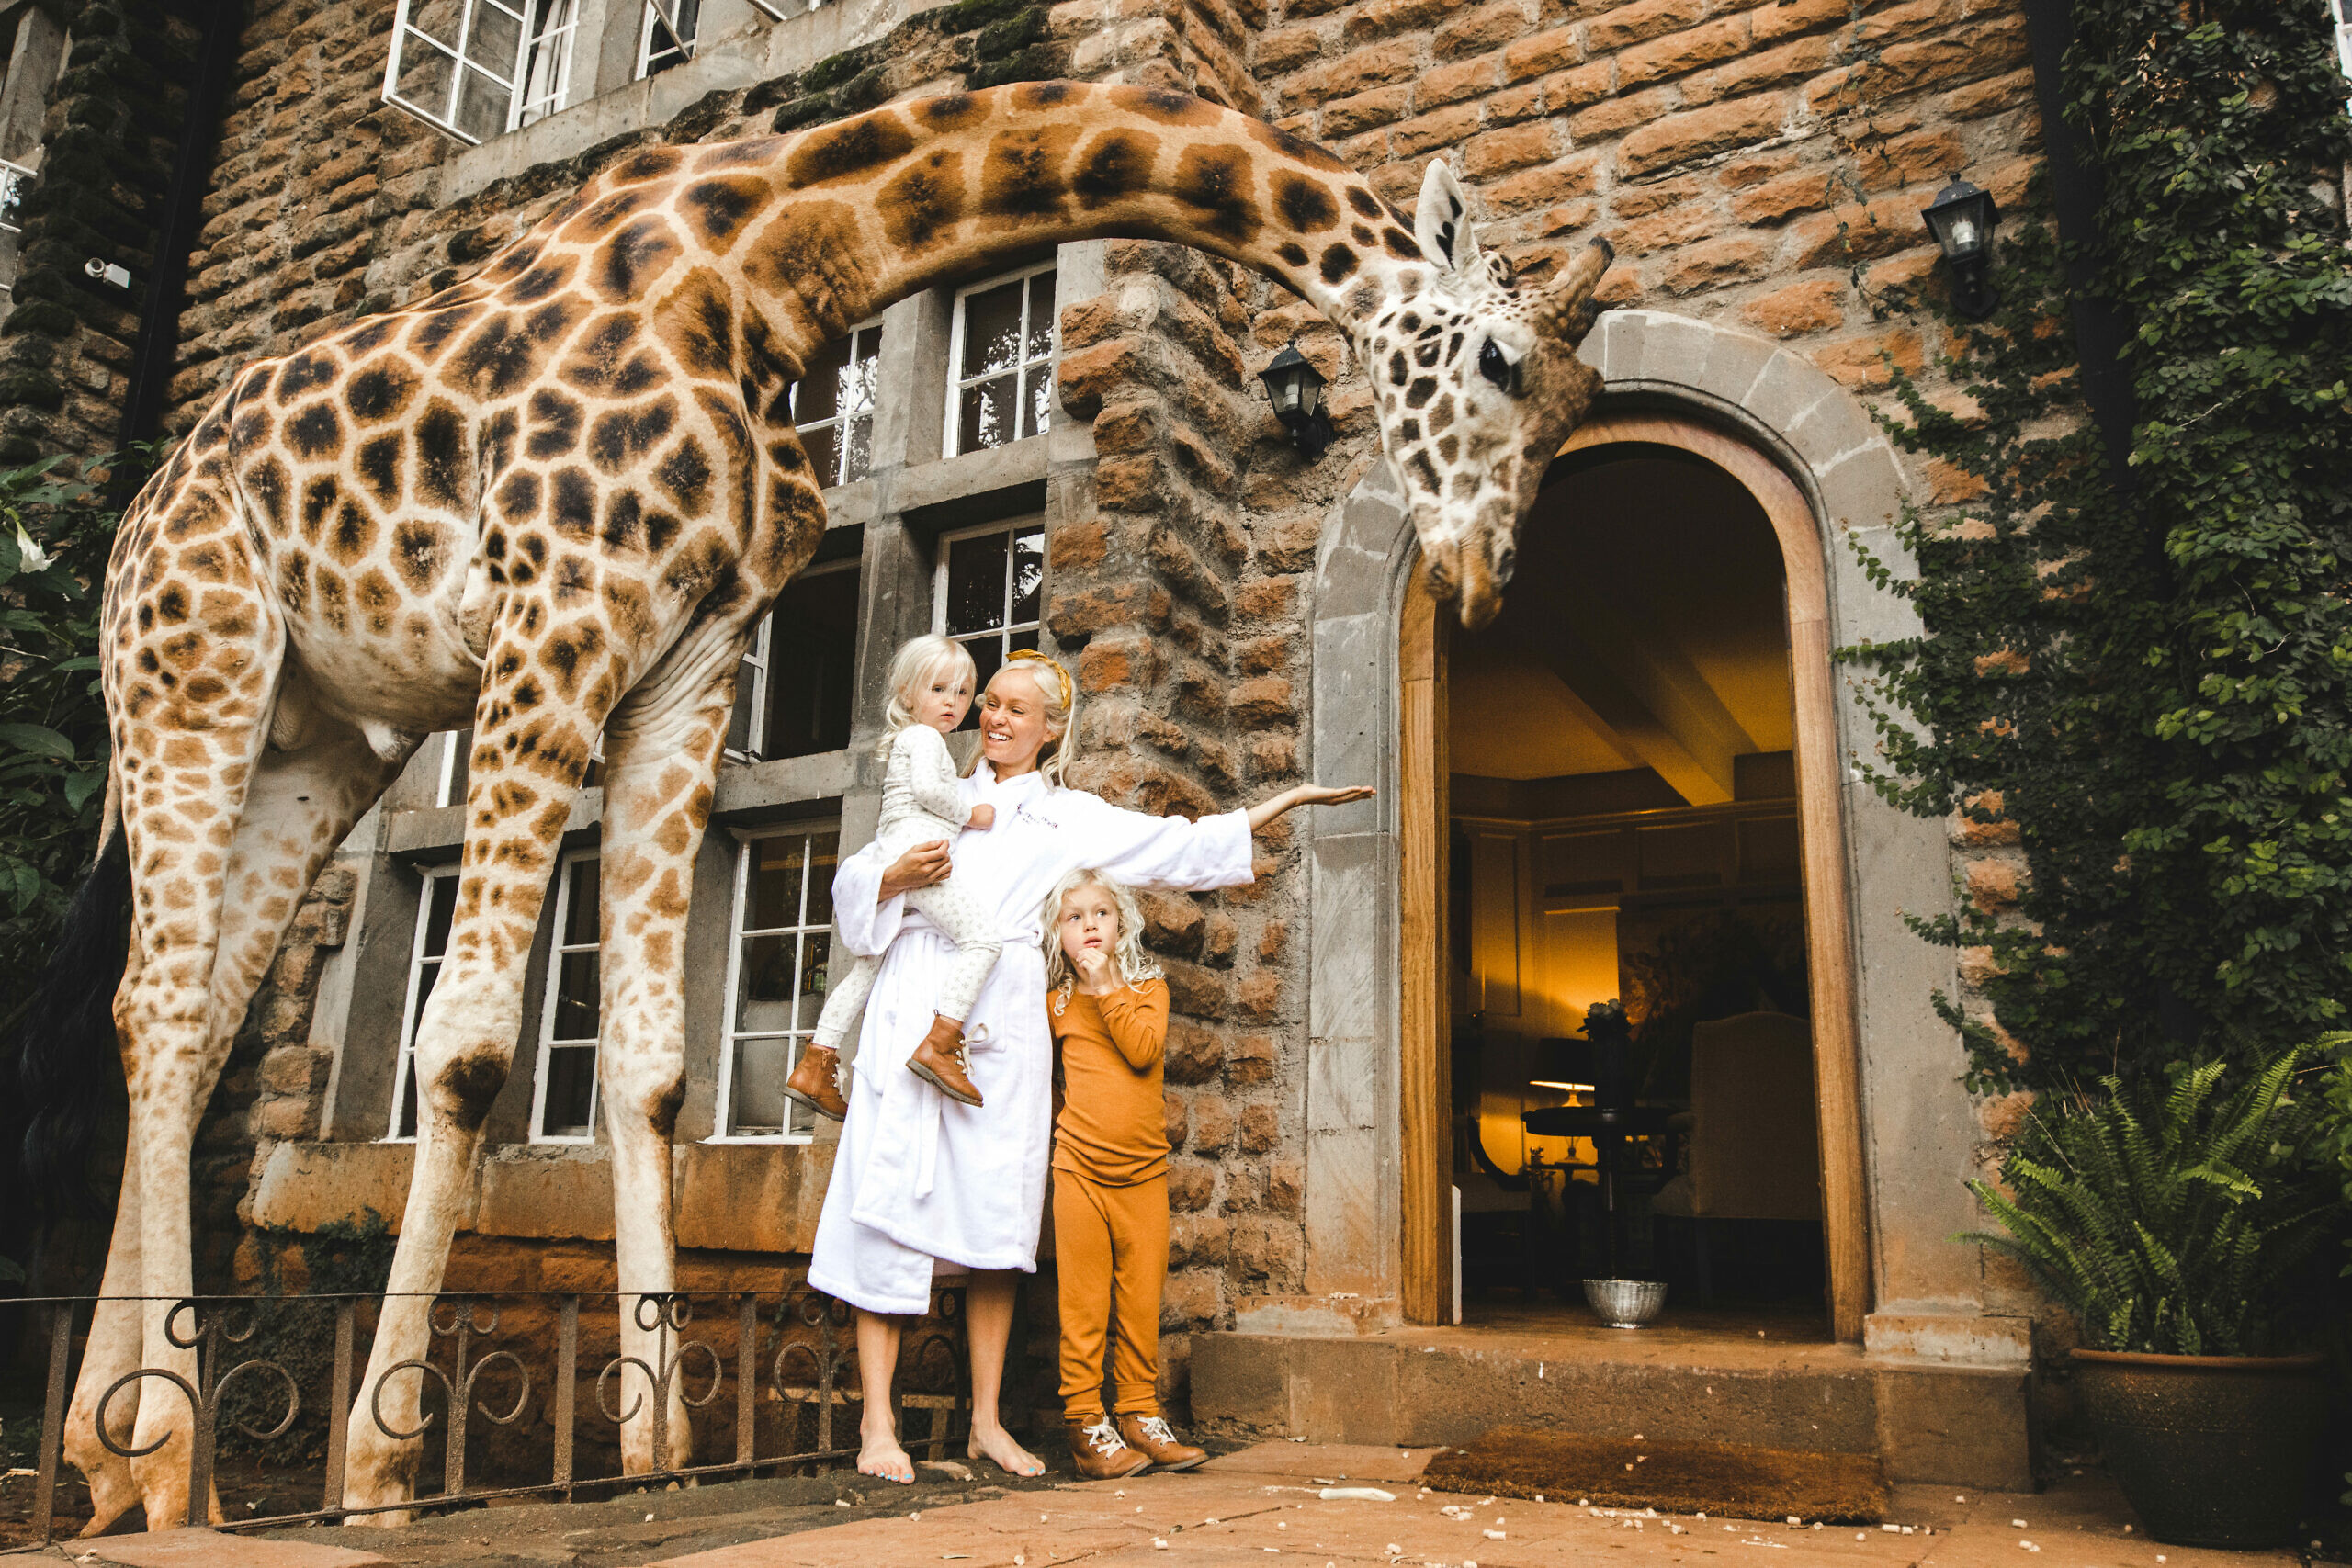 THE GIRAFFE MANOR: Our Family Stay